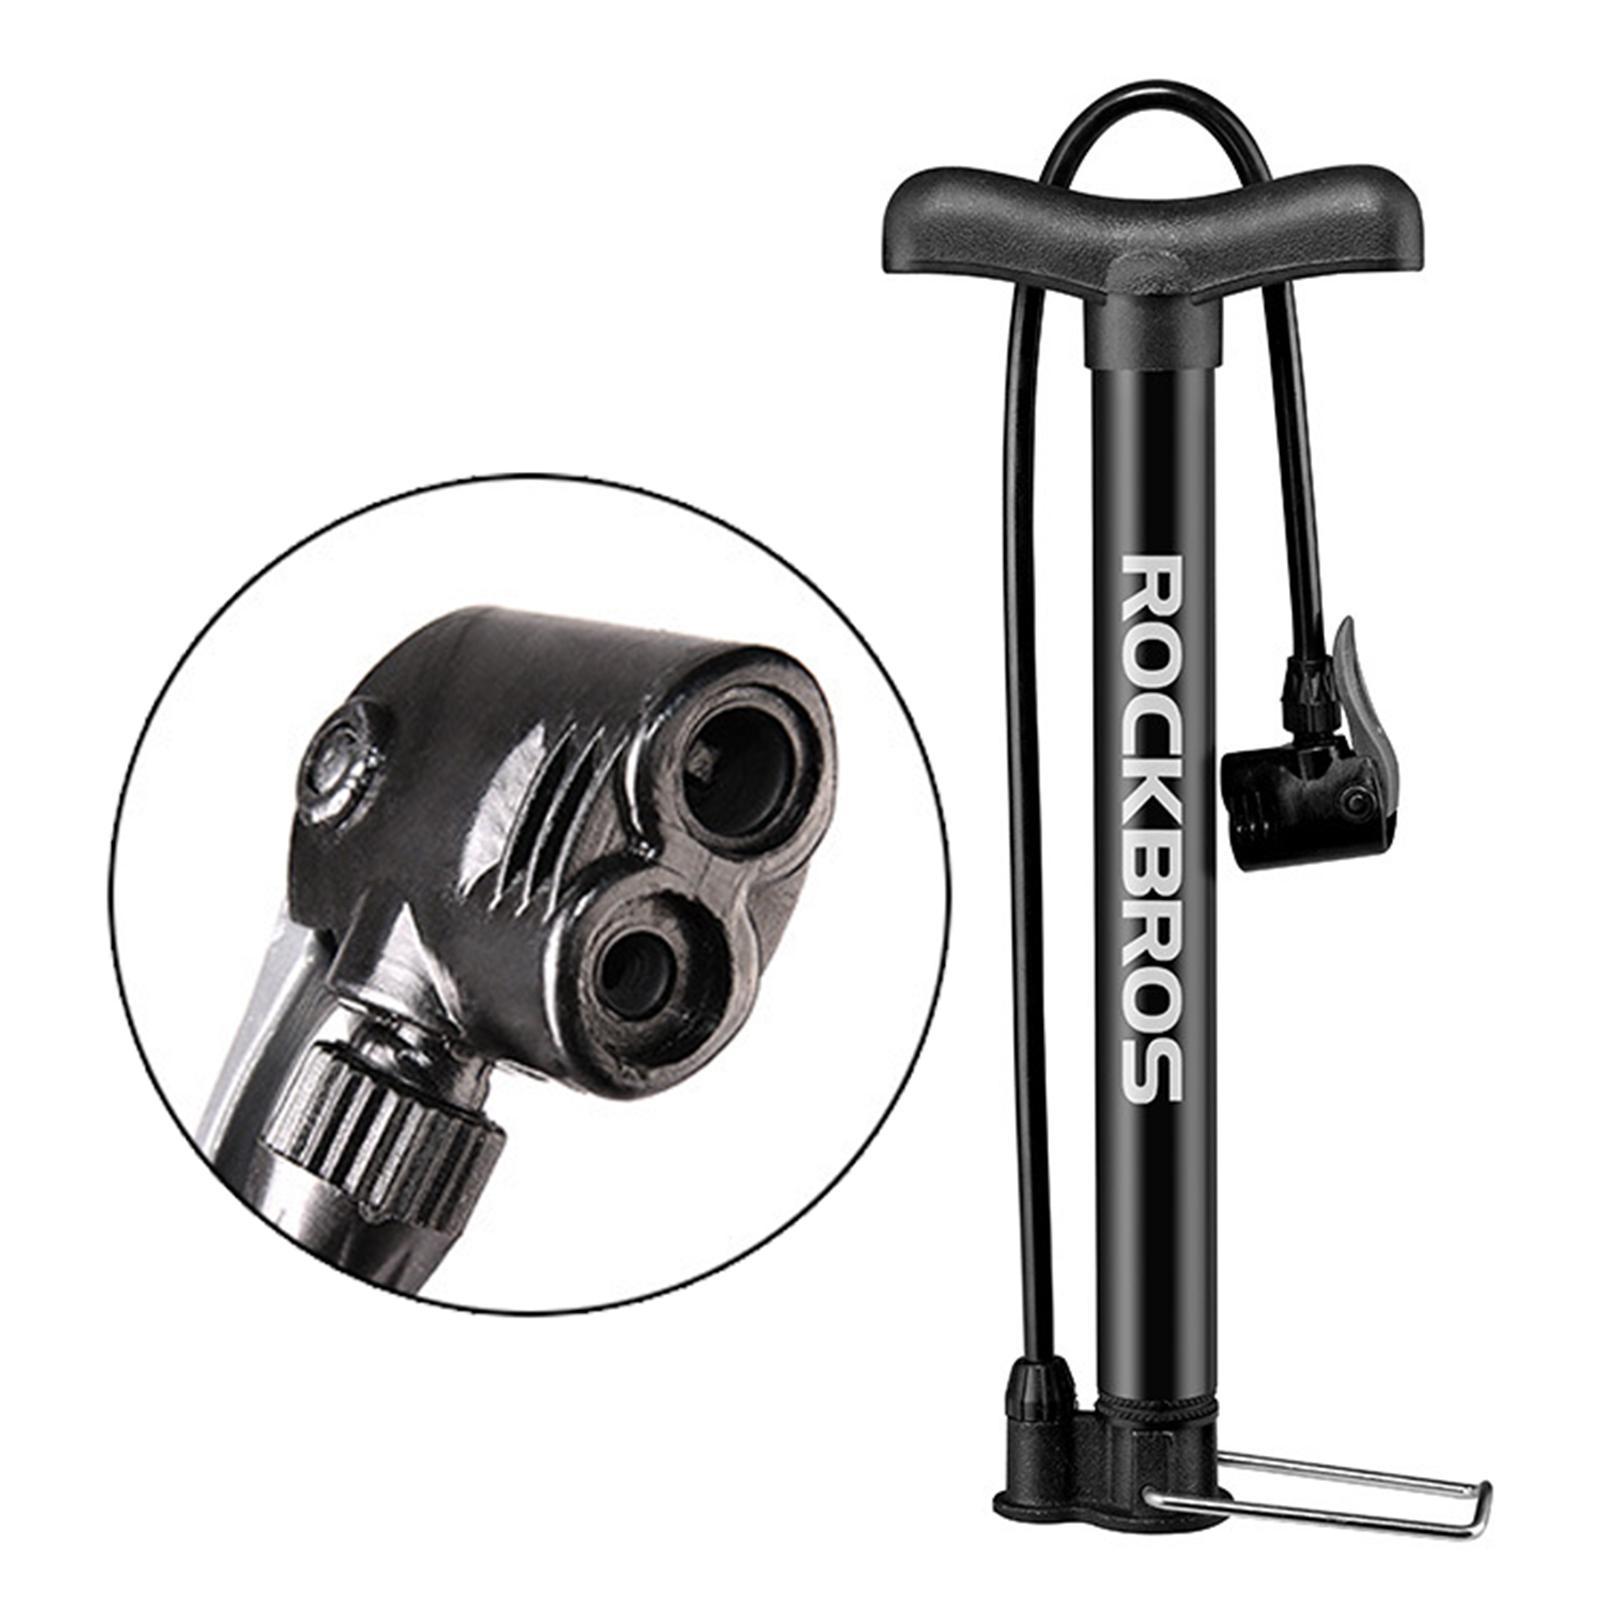 Cycling  Floor Pump  Air  for  and